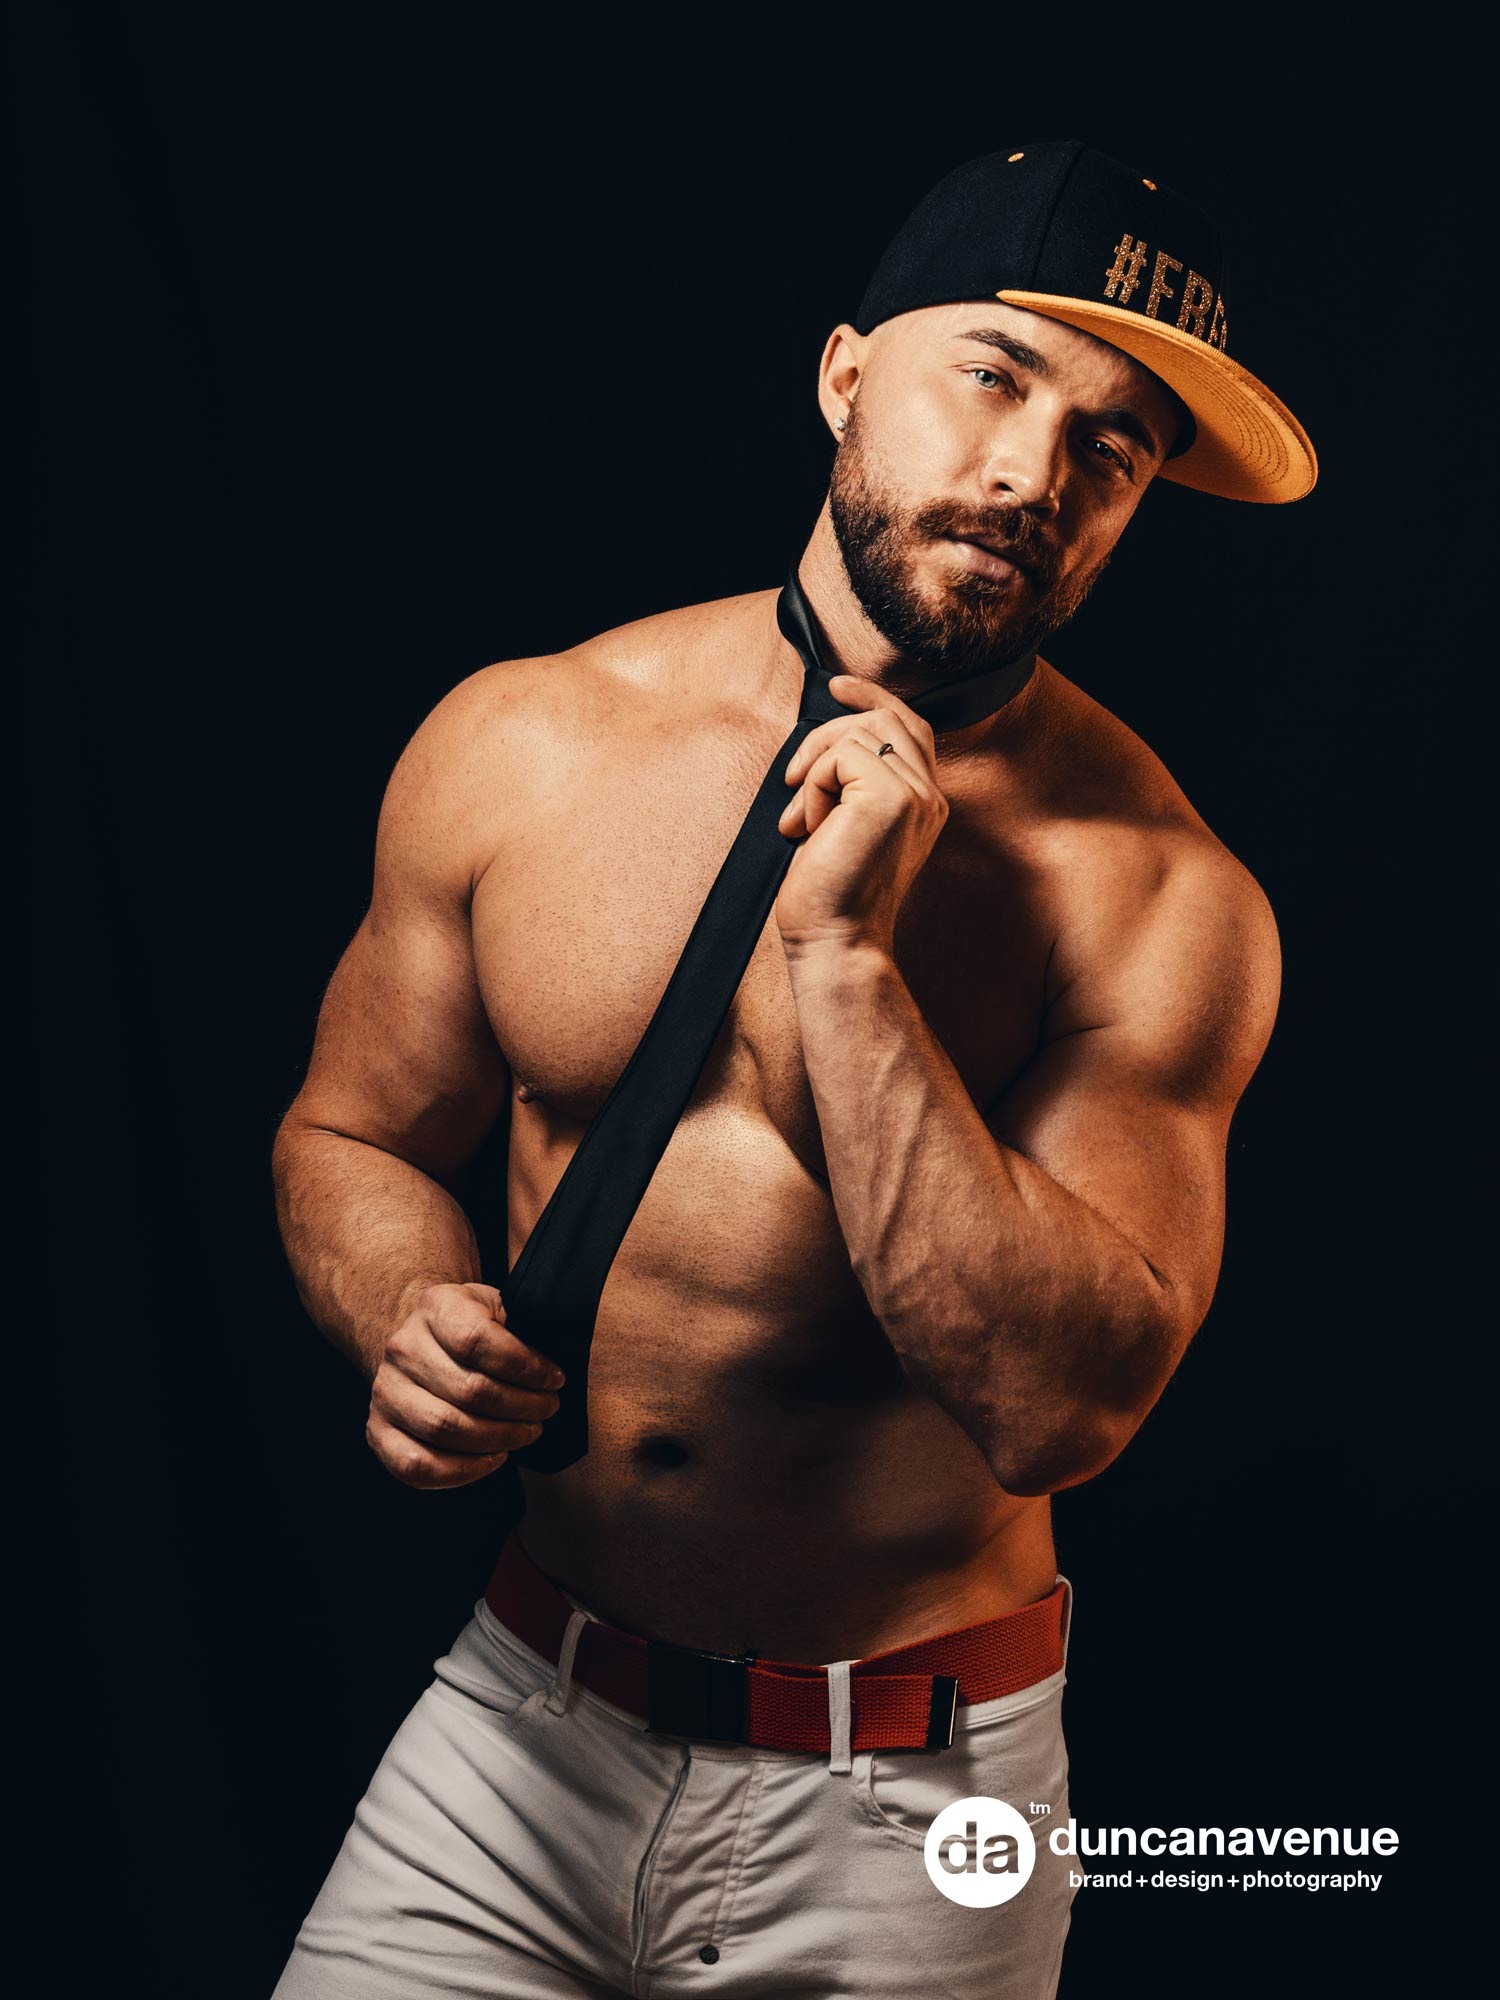 Fitness and Bodybuilding Photography by Maxwell L. Alexander – Best Gay OnlyFans – New York